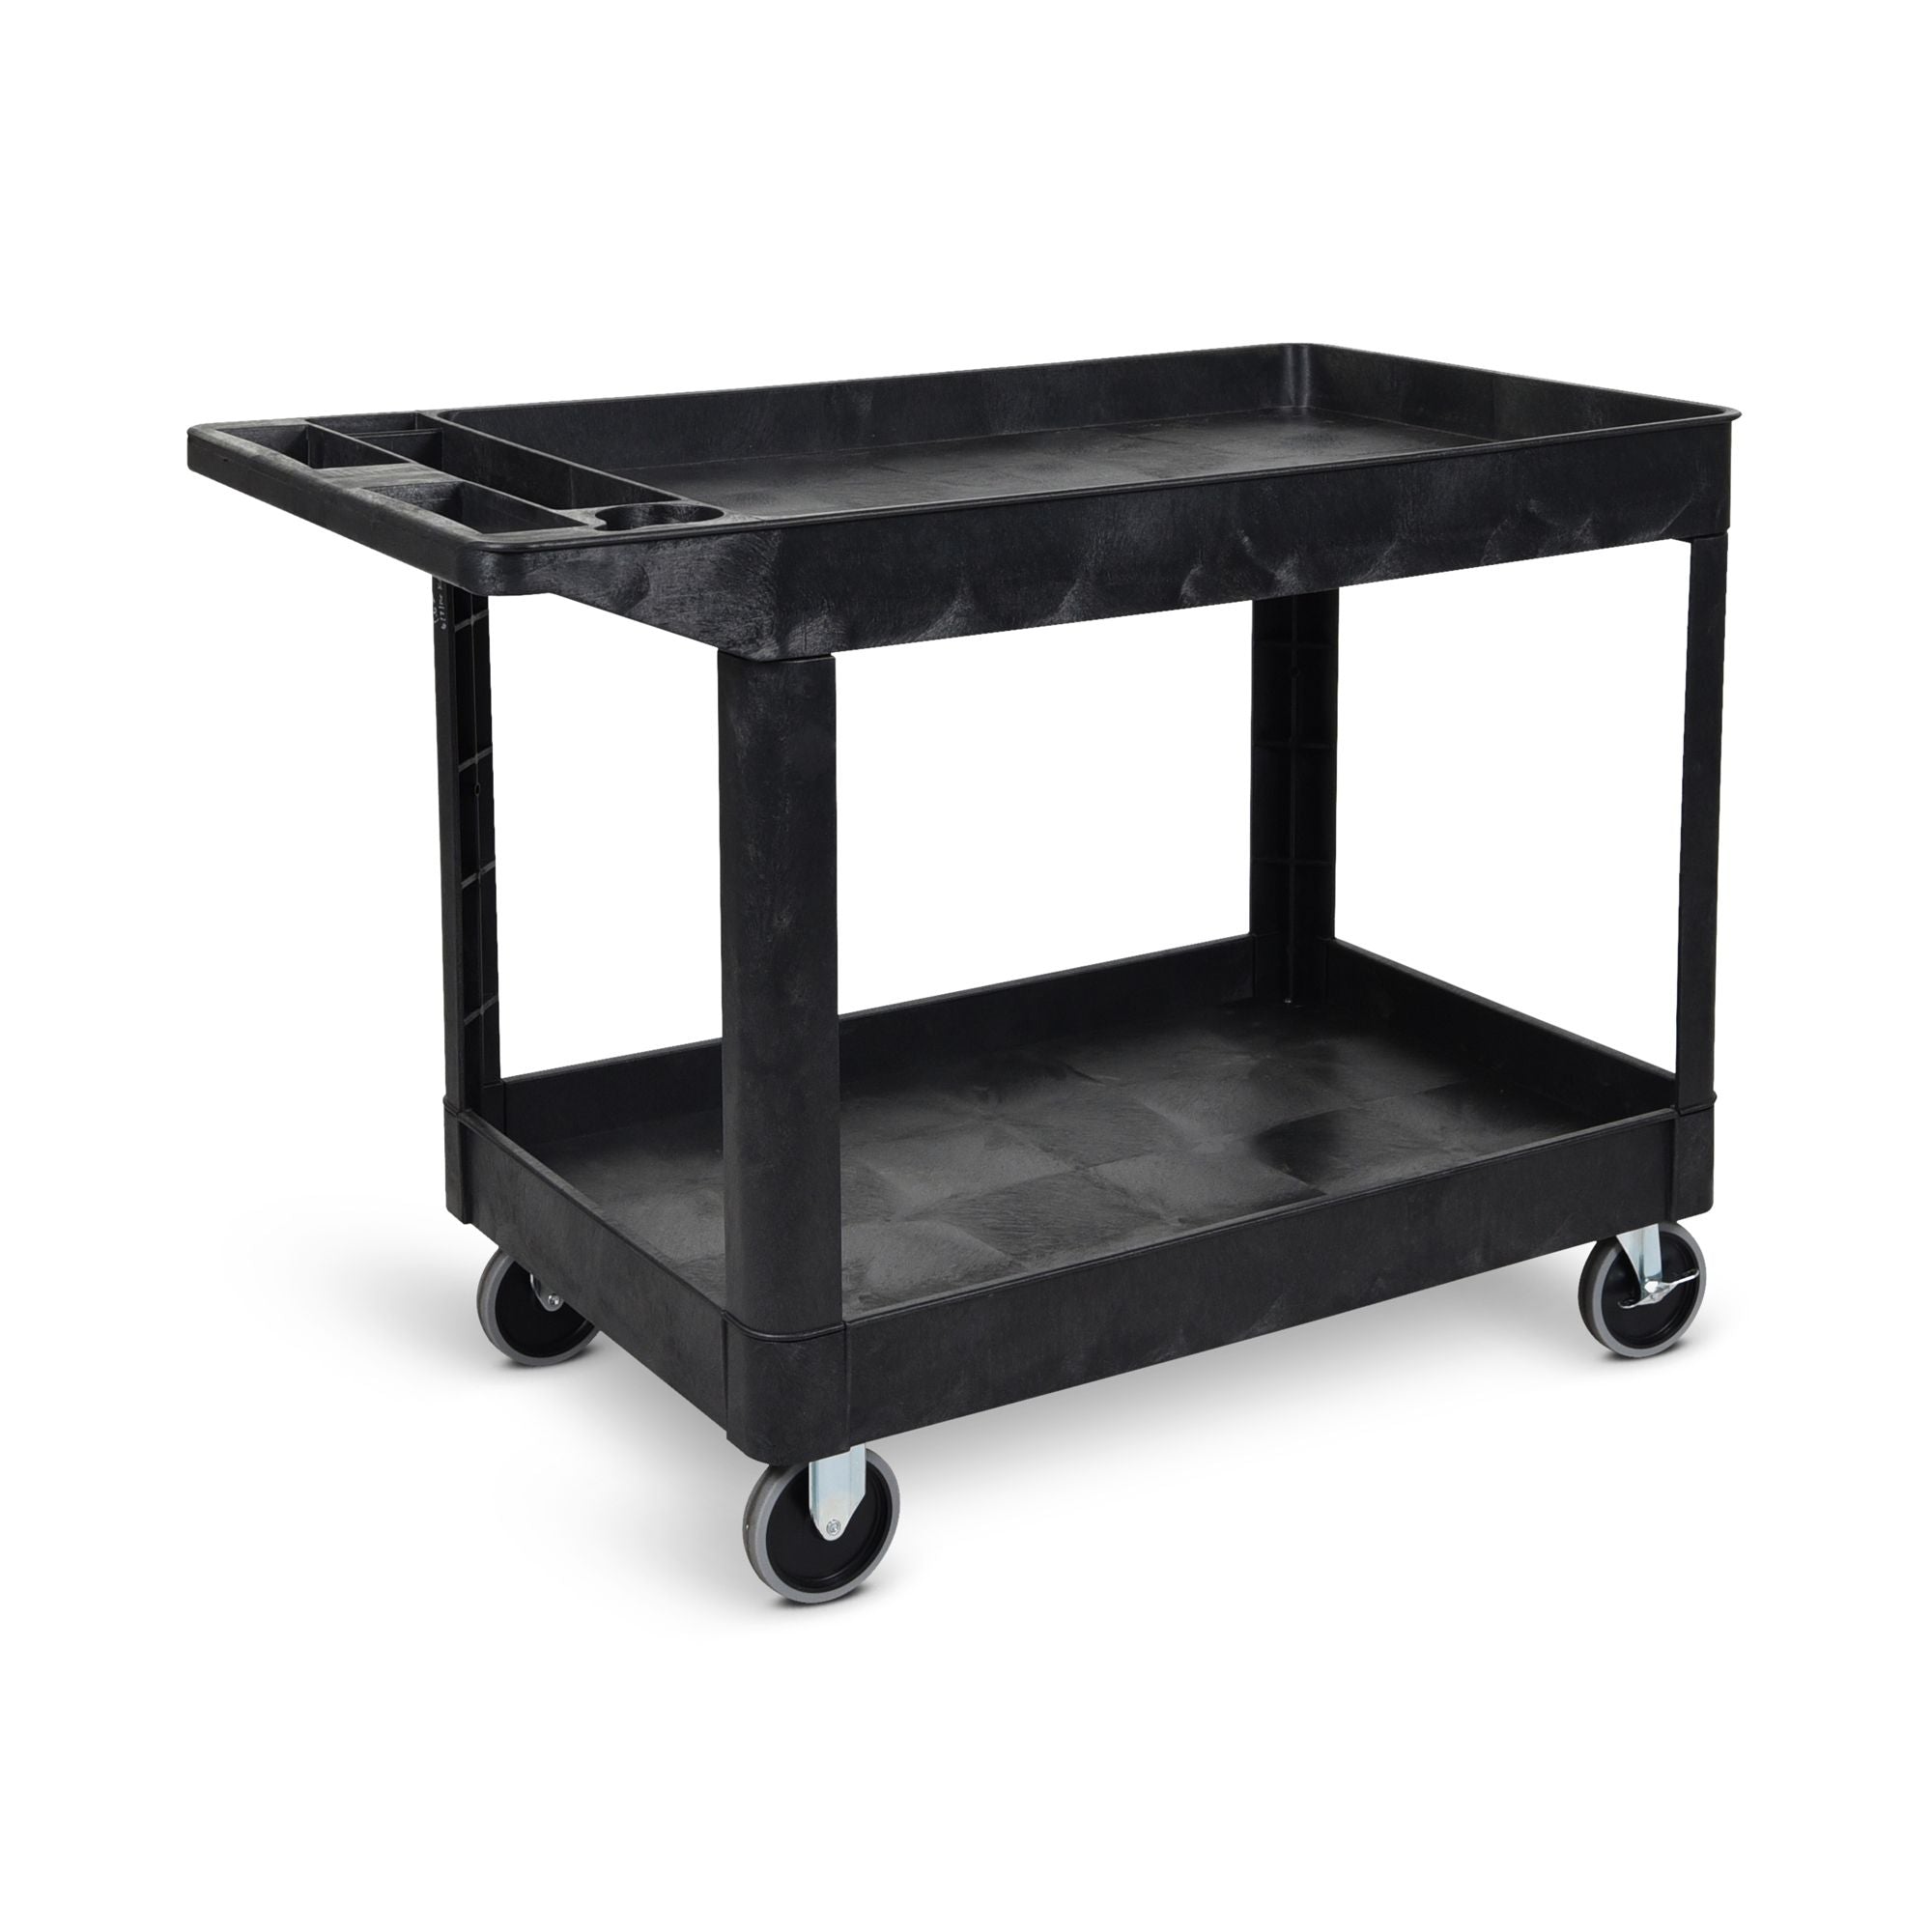 Tub Shelf Extra Large Utility Cart | Tubstr by Stand Steady